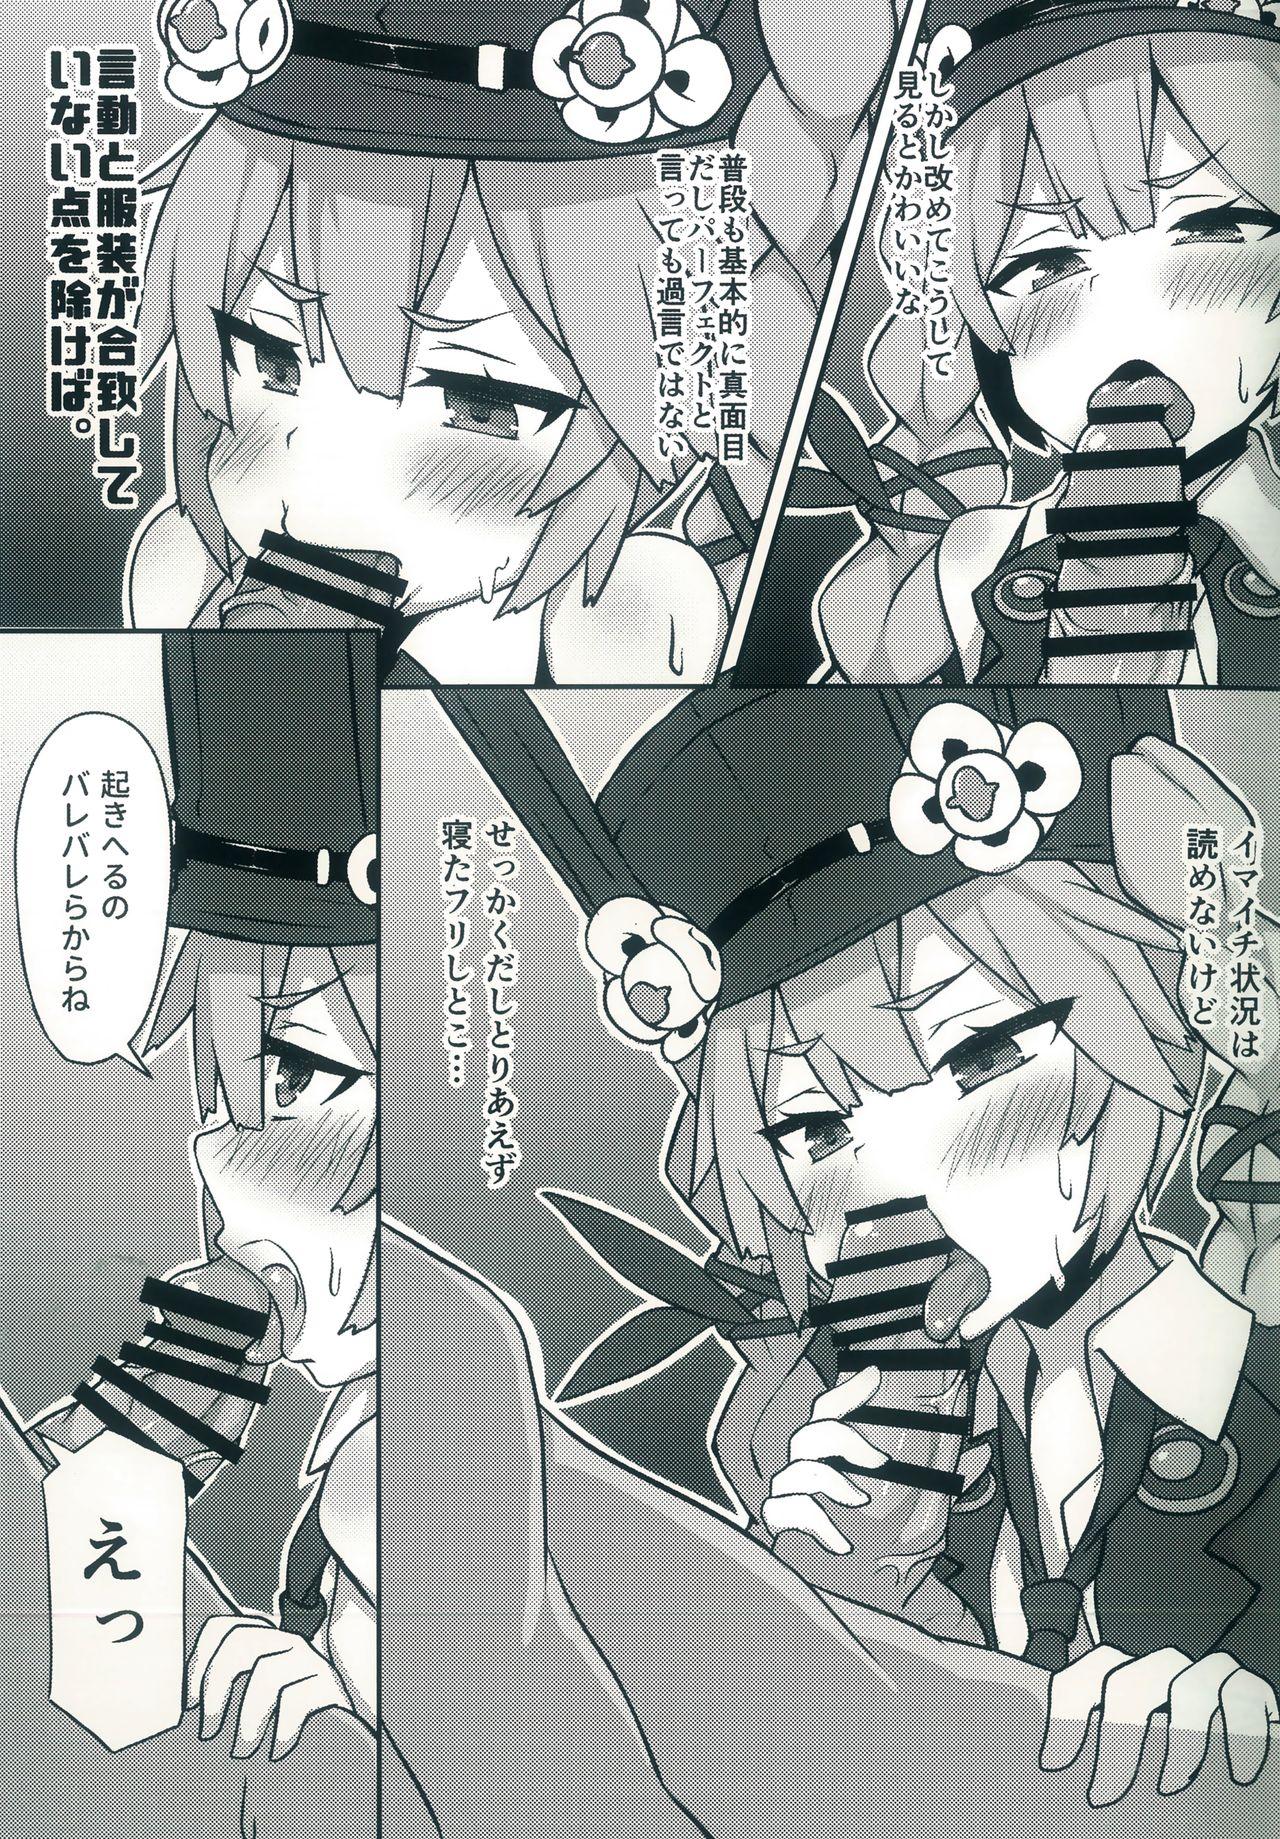 Climax Dummy rabby - Girls frontline Oral - Page 9